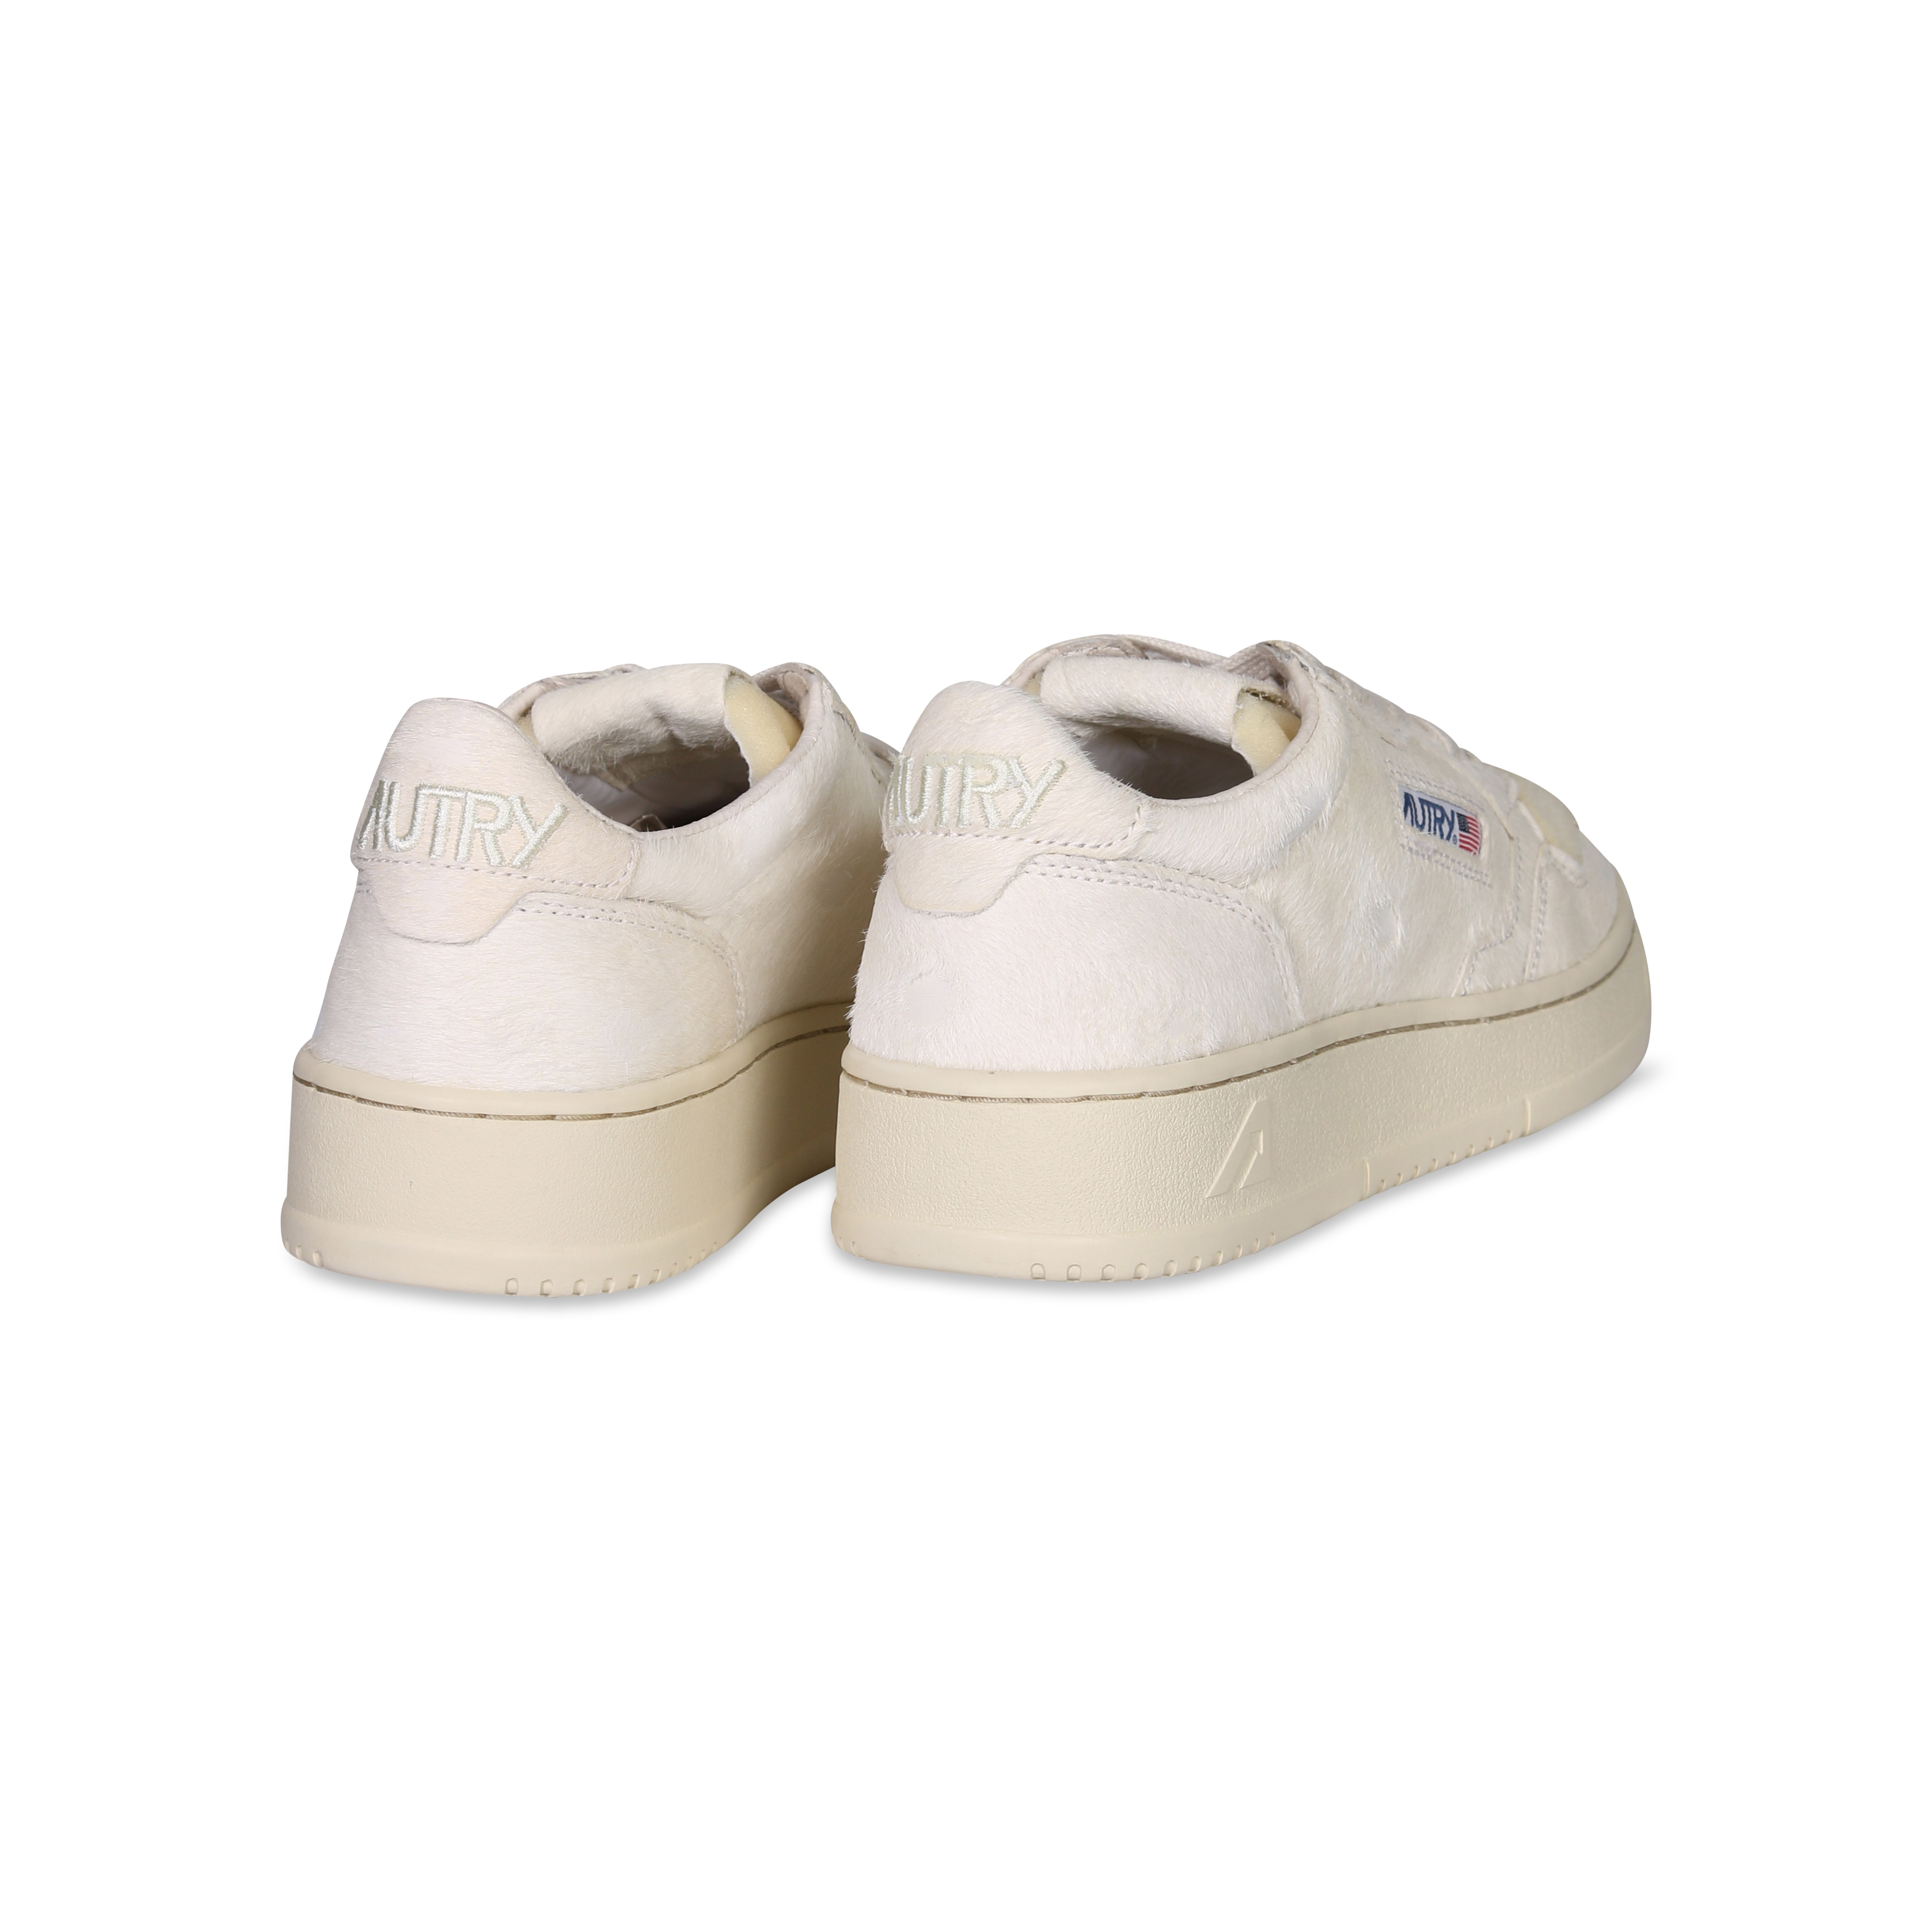 Autry Action Shoes Low Sneaker Pony